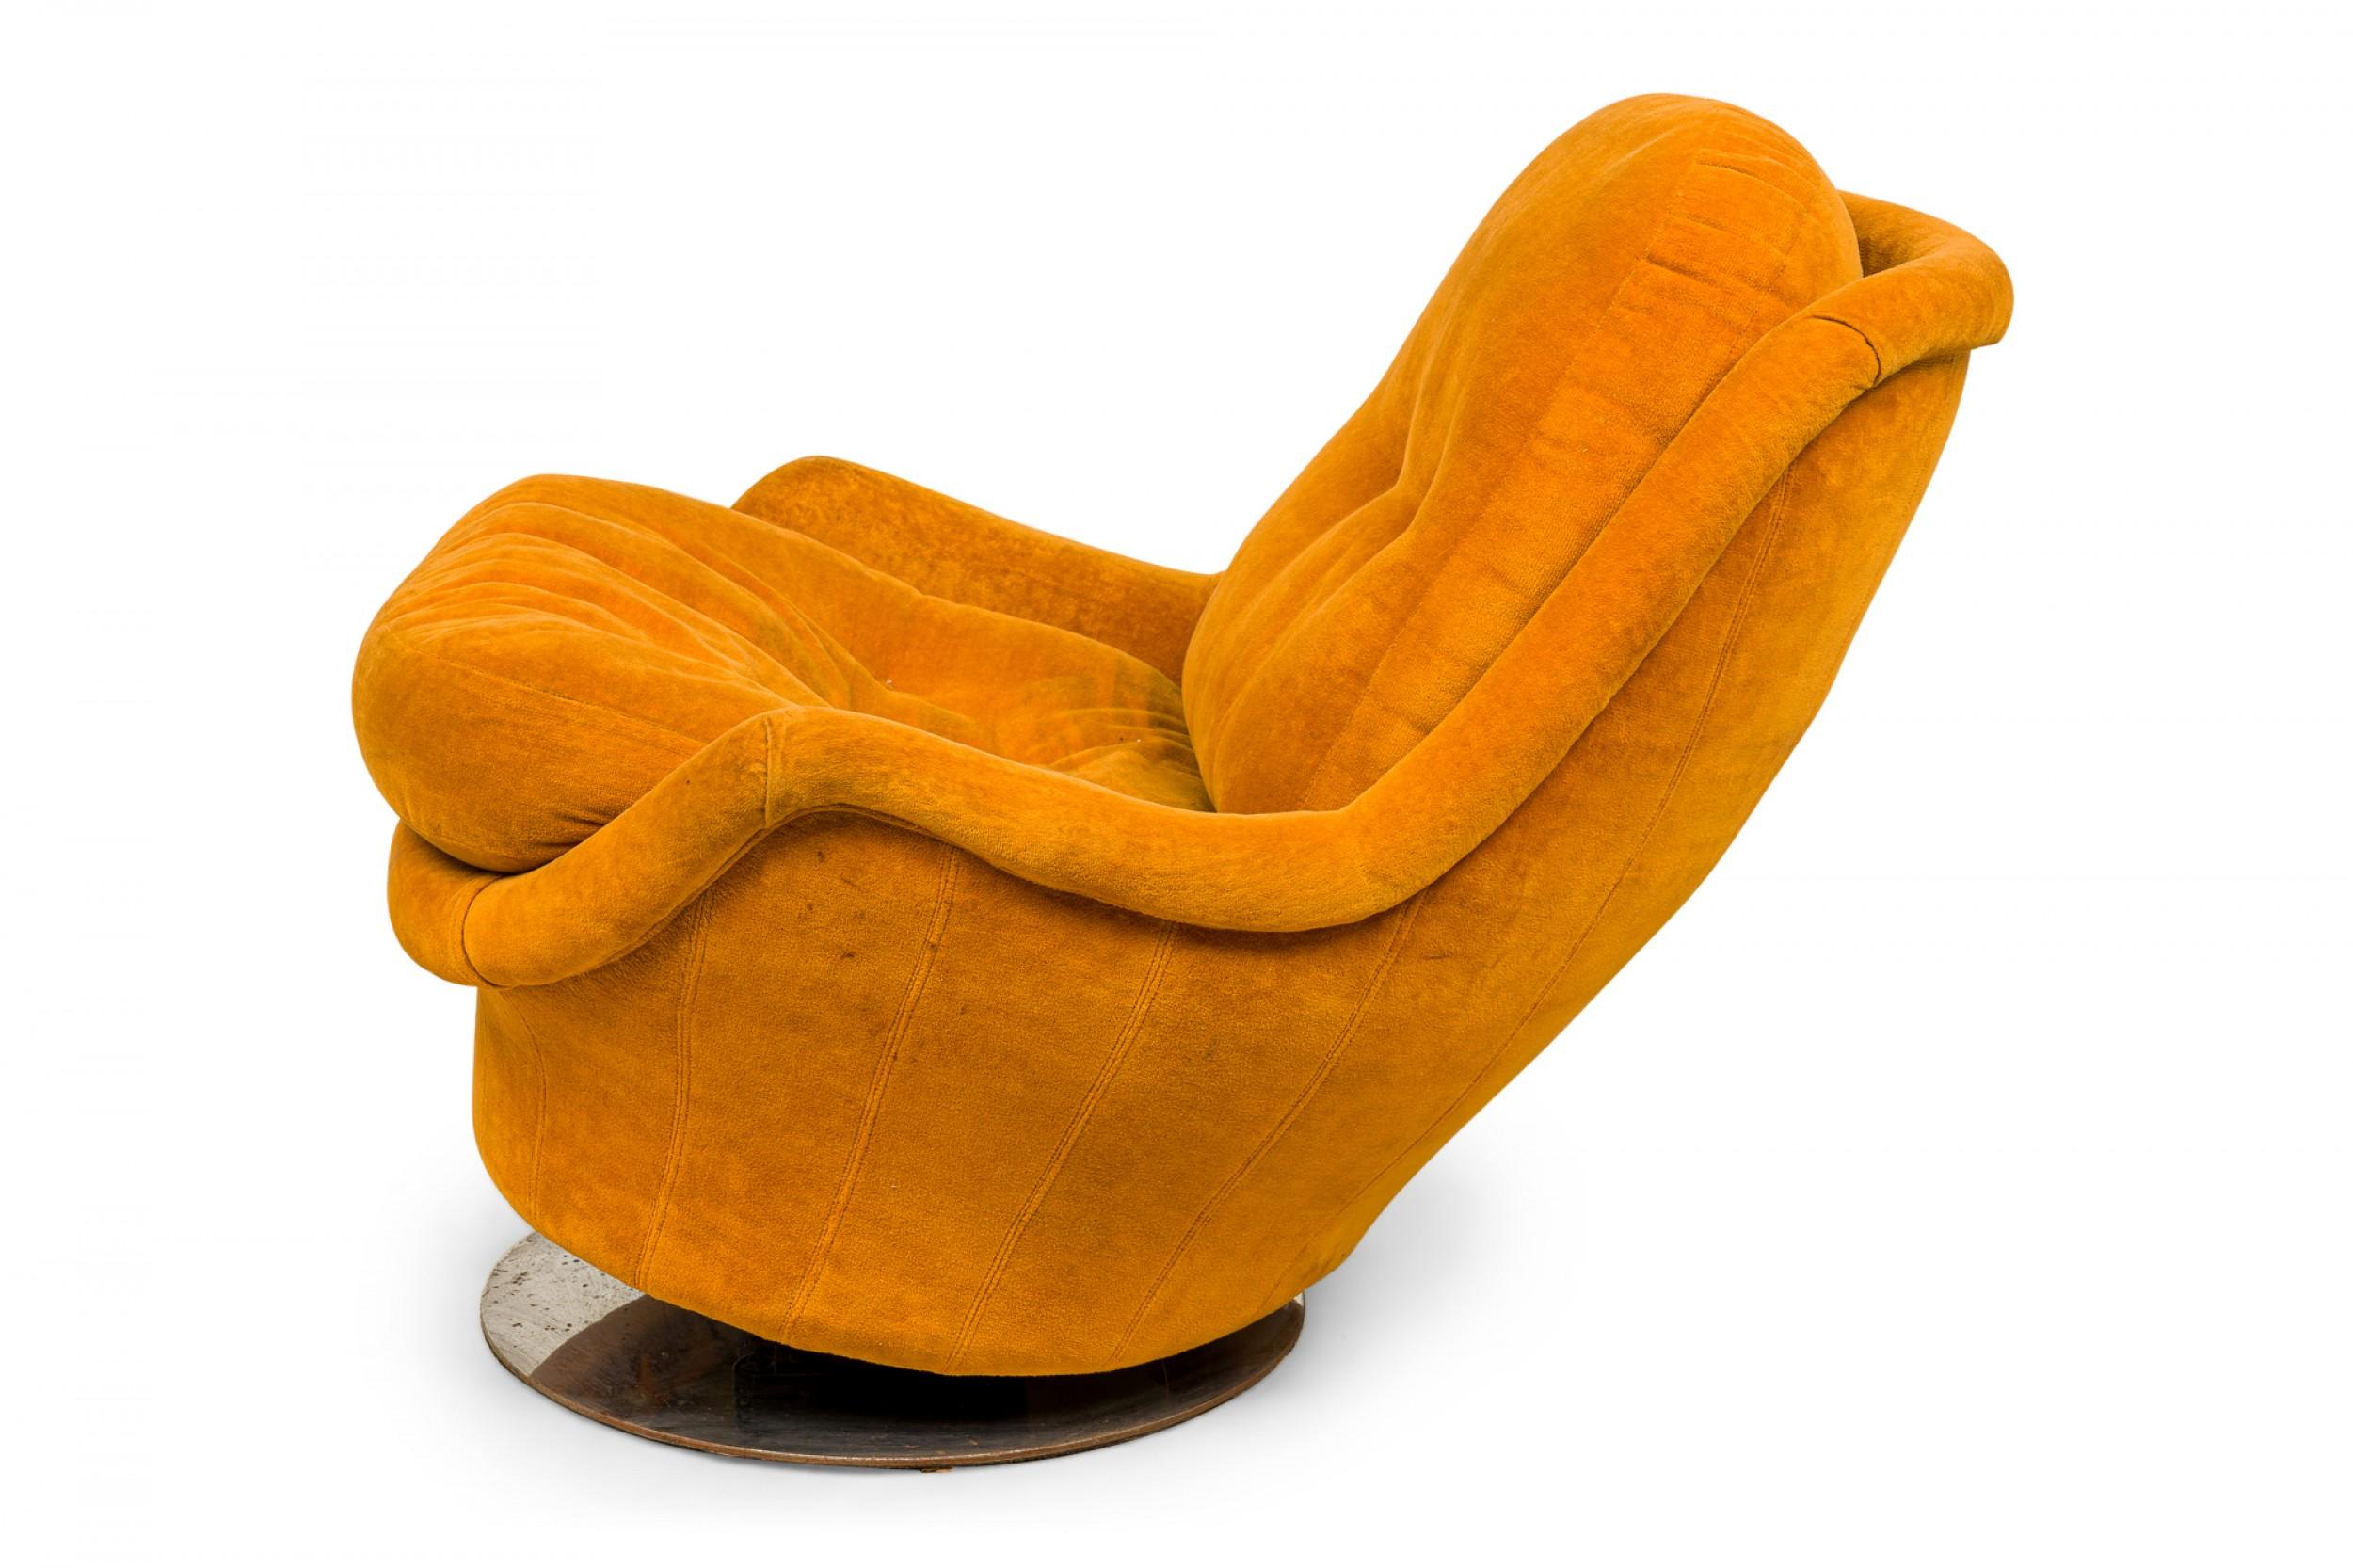 star wars loungers egg chair